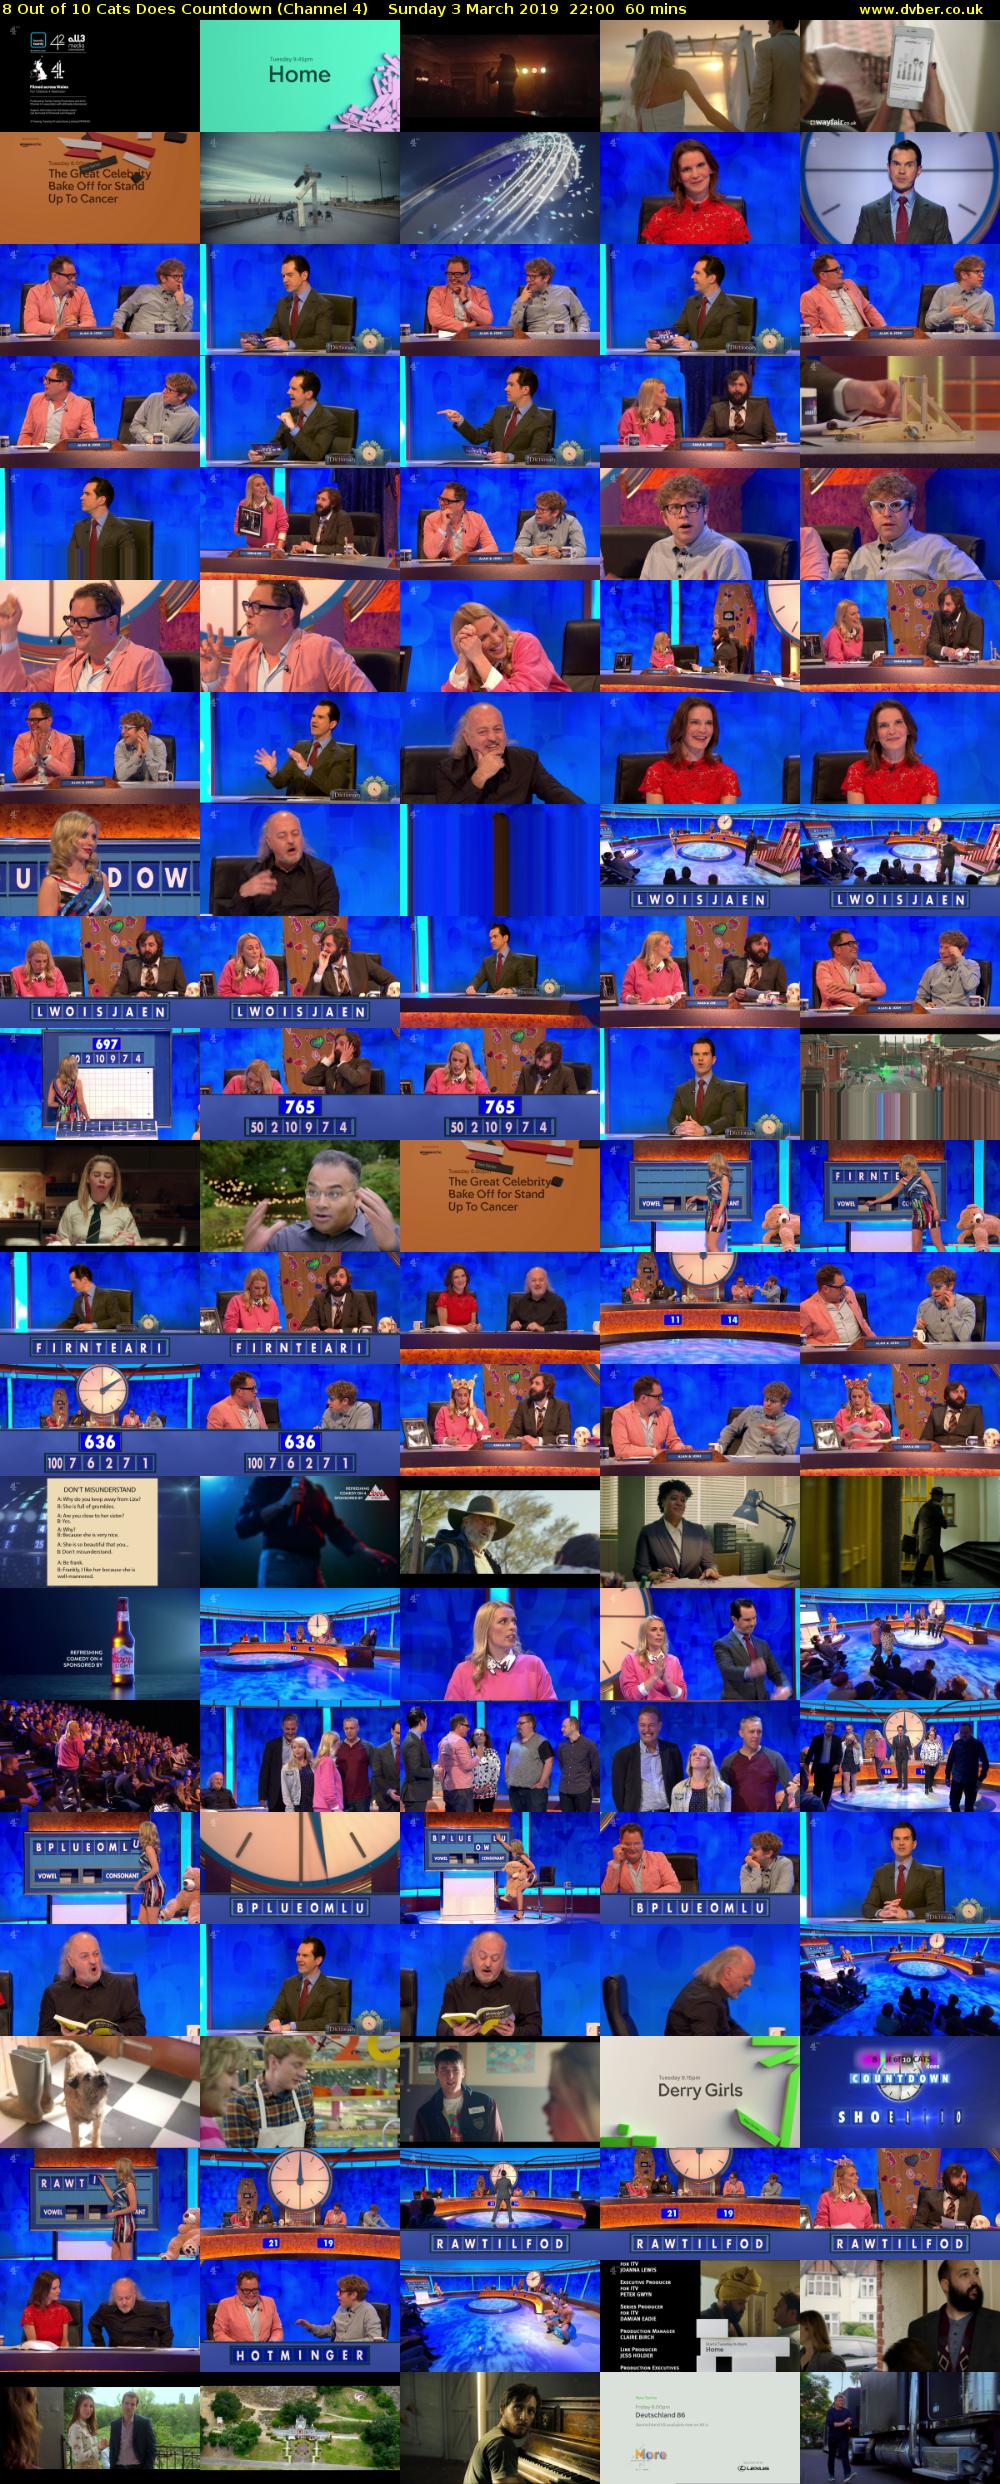 8 Out of 10 Cats Does Countdown (Channel 4) Sunday 3 March 2019 22:00 - 23:00